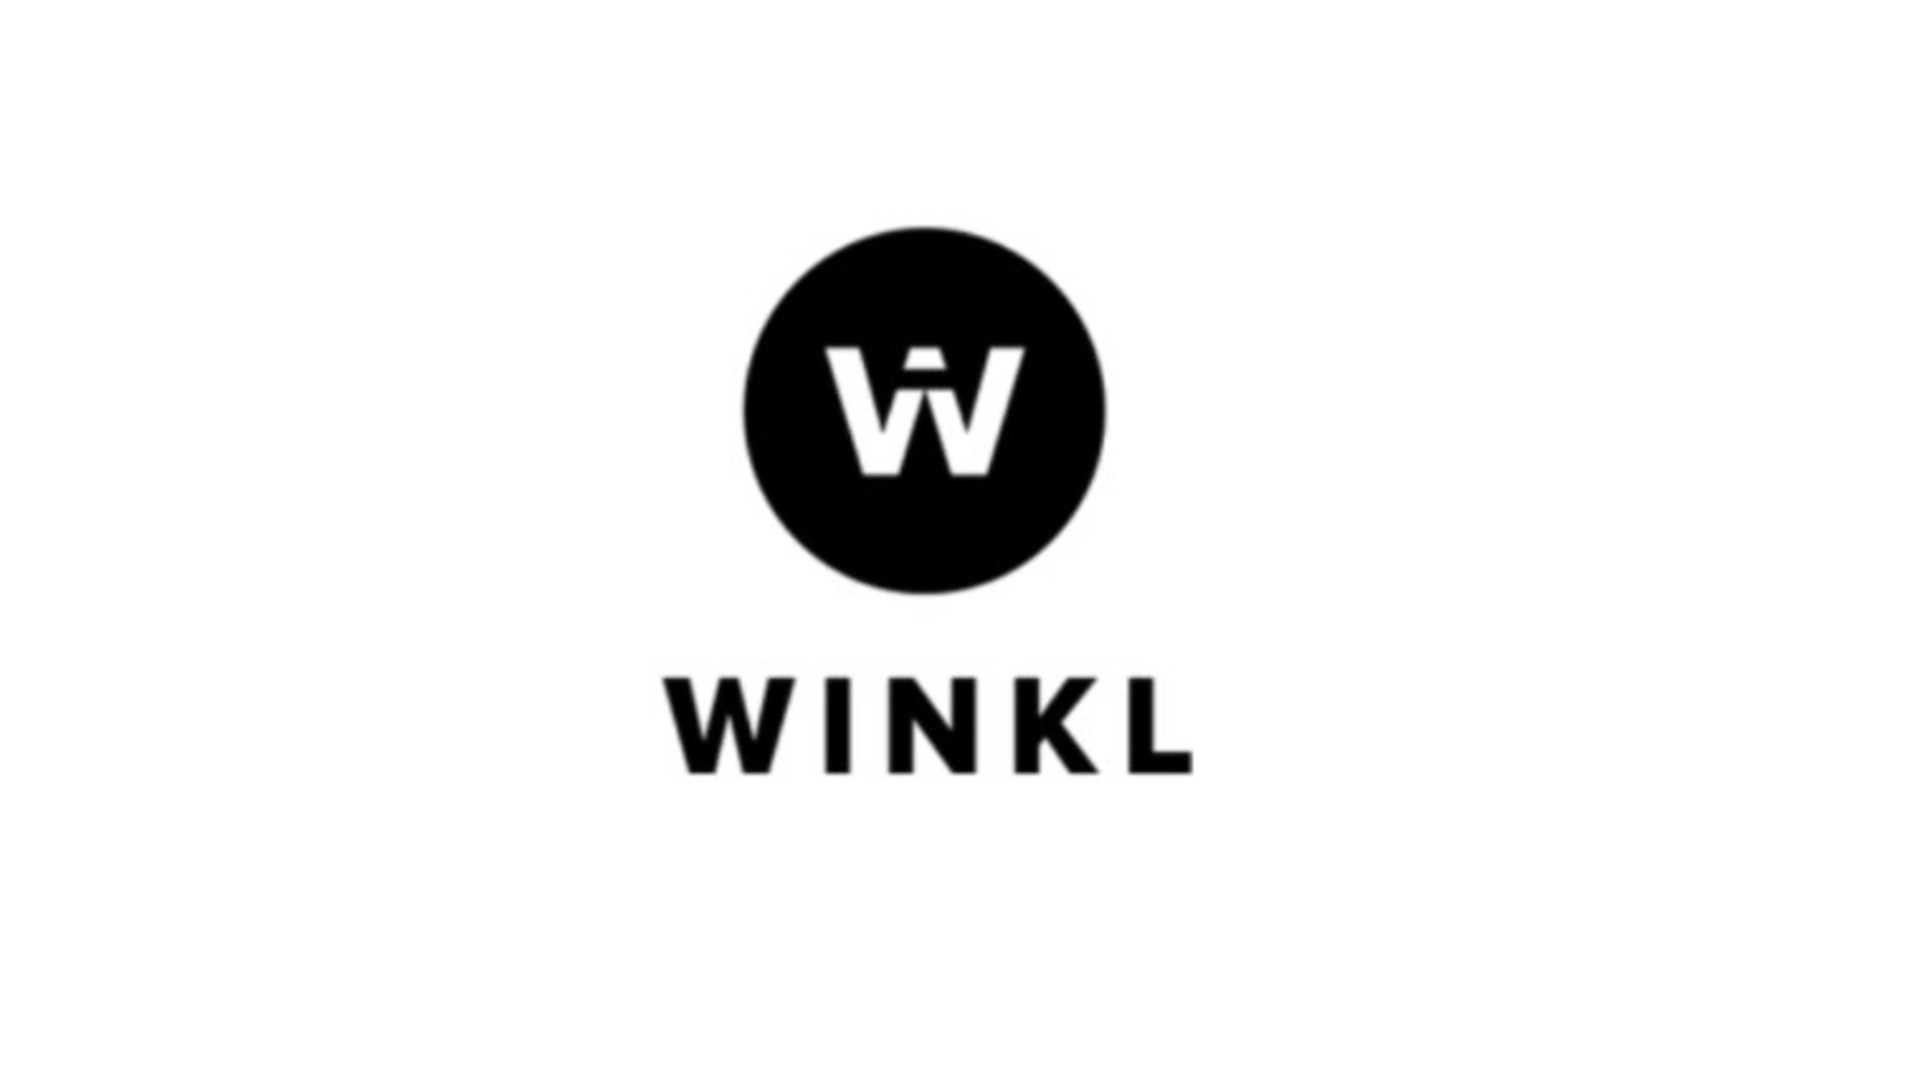 Winkl launches ‘Winkl search’ search engine to discover and filter influencers